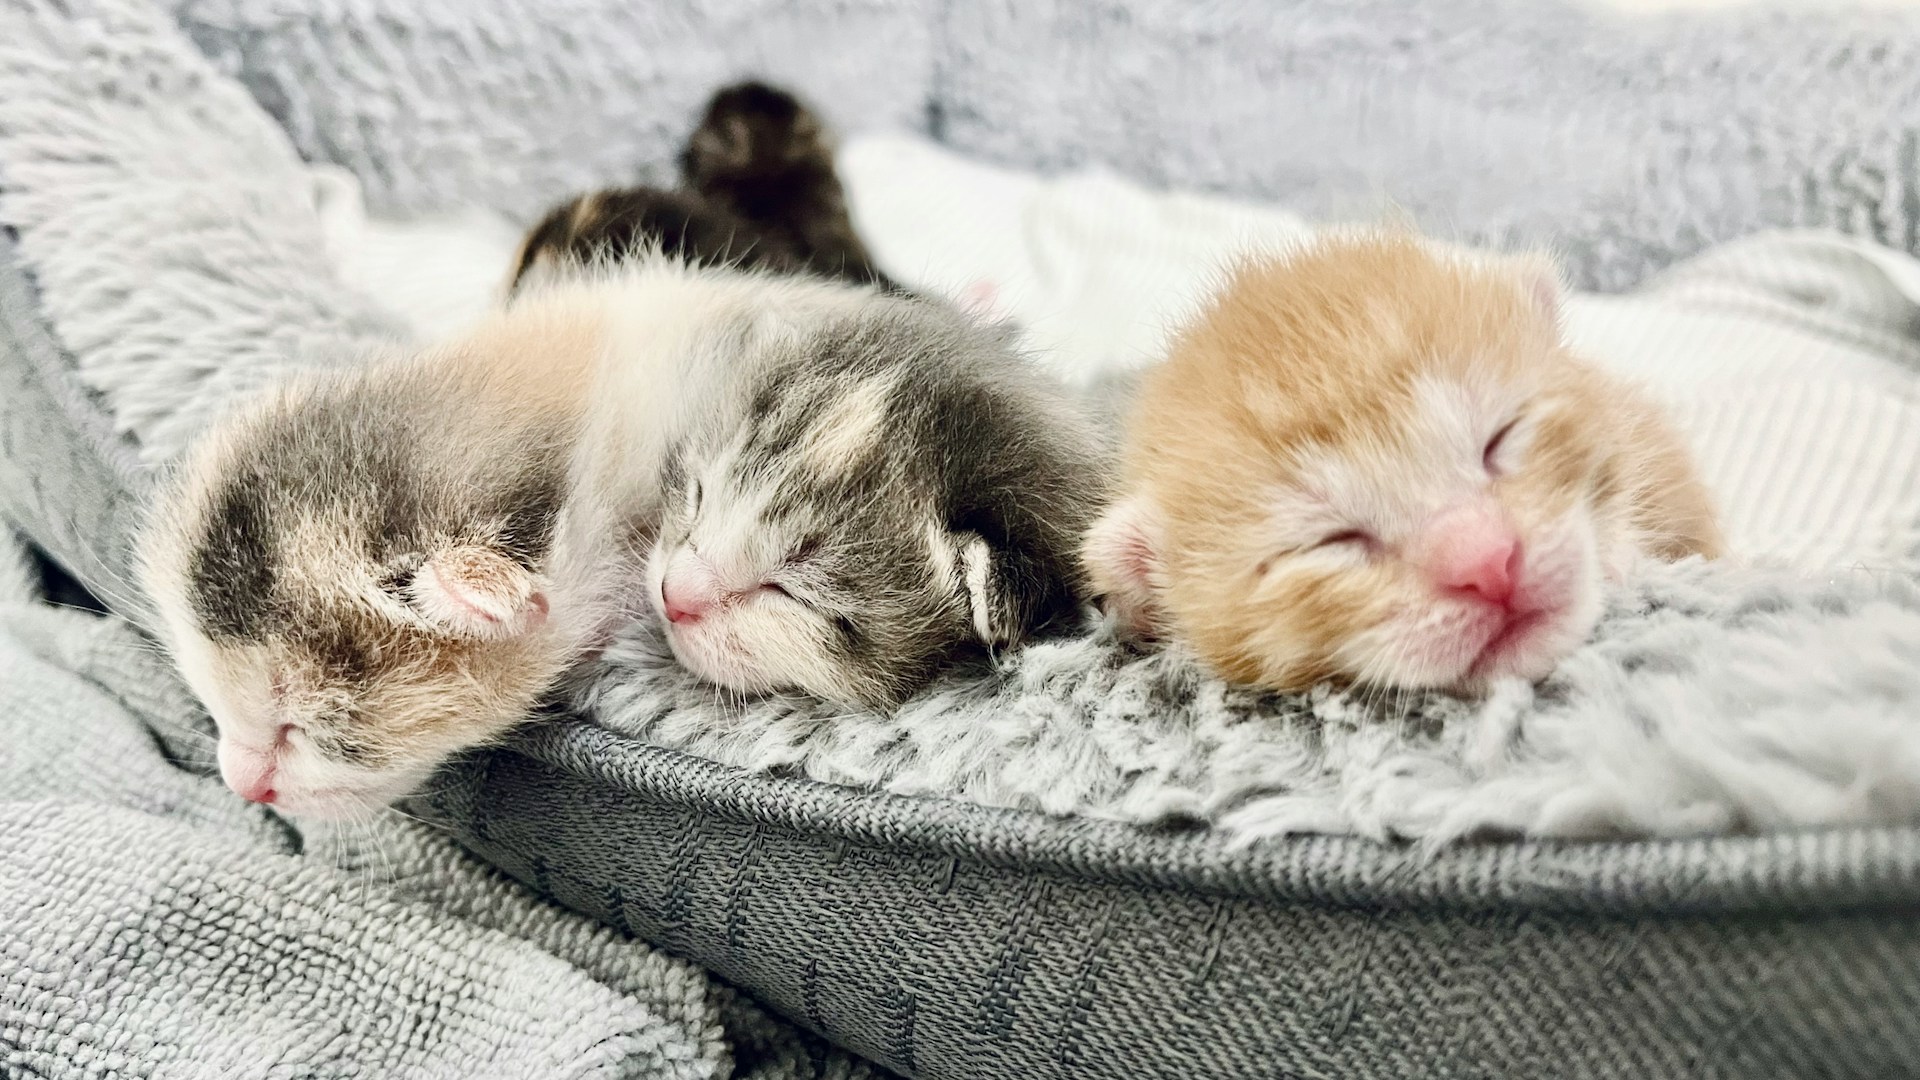 How to Care for an Abandoned Newborn Kitten